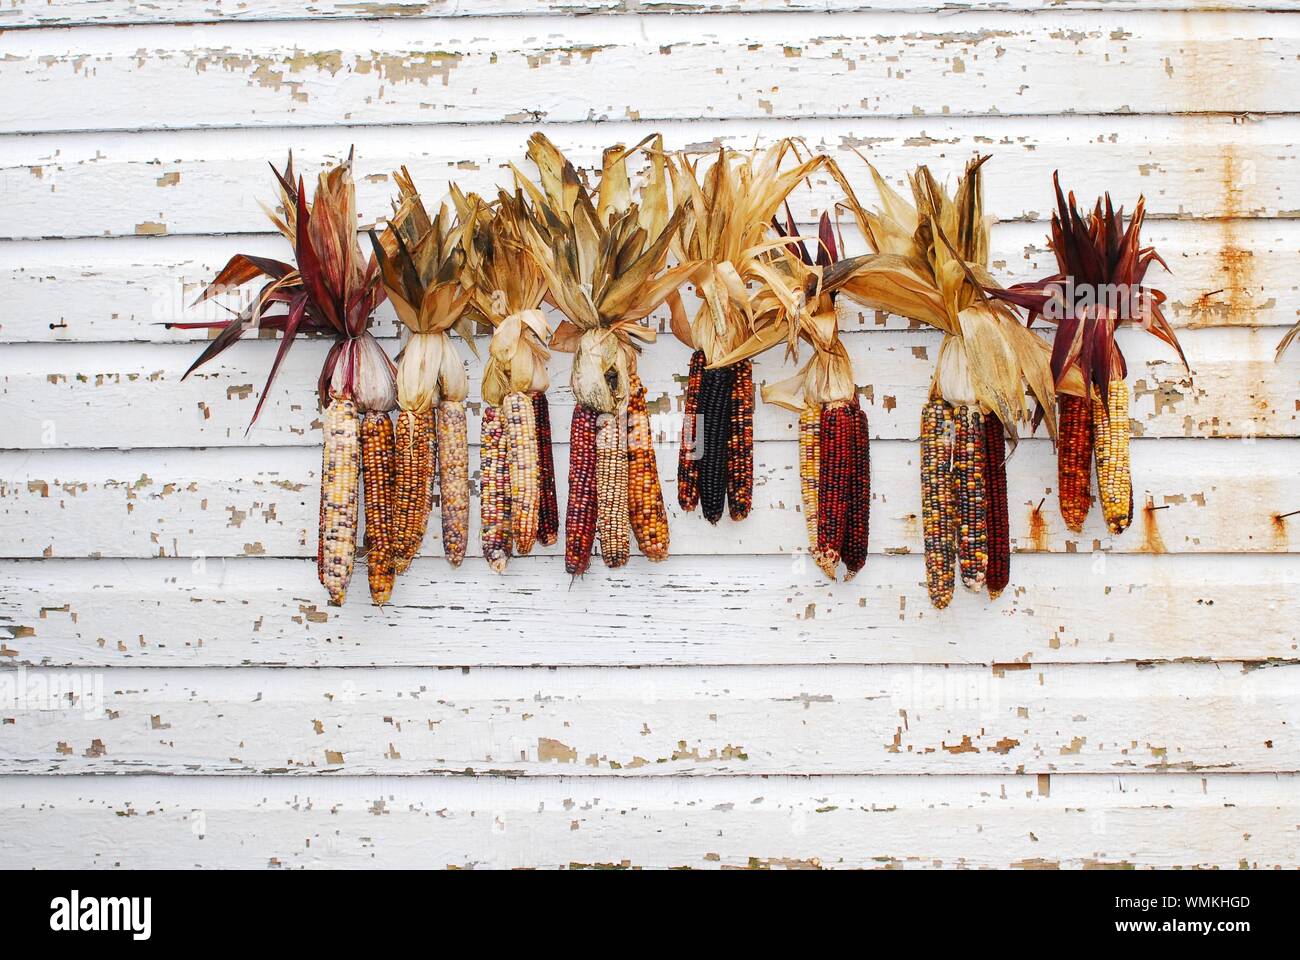 Multicolored Indian Corn hanging on a rustic barn wall after being harvested during the Autumn season Stock Photo